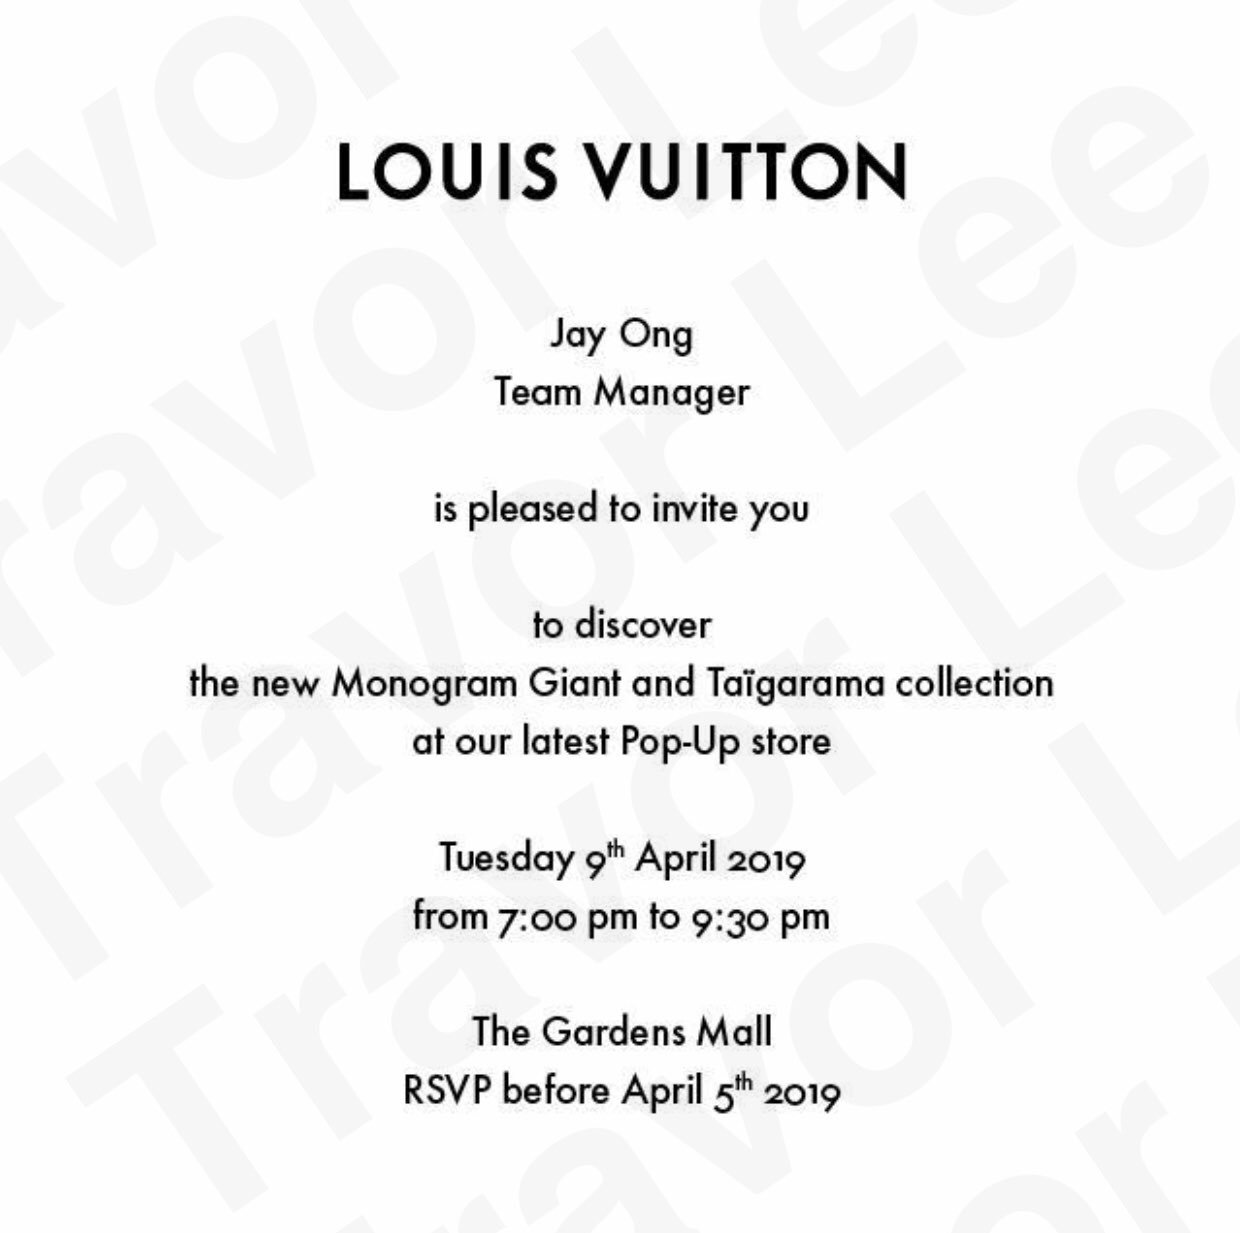 Louis Vuitton - I would like to invite you all to see the Louis